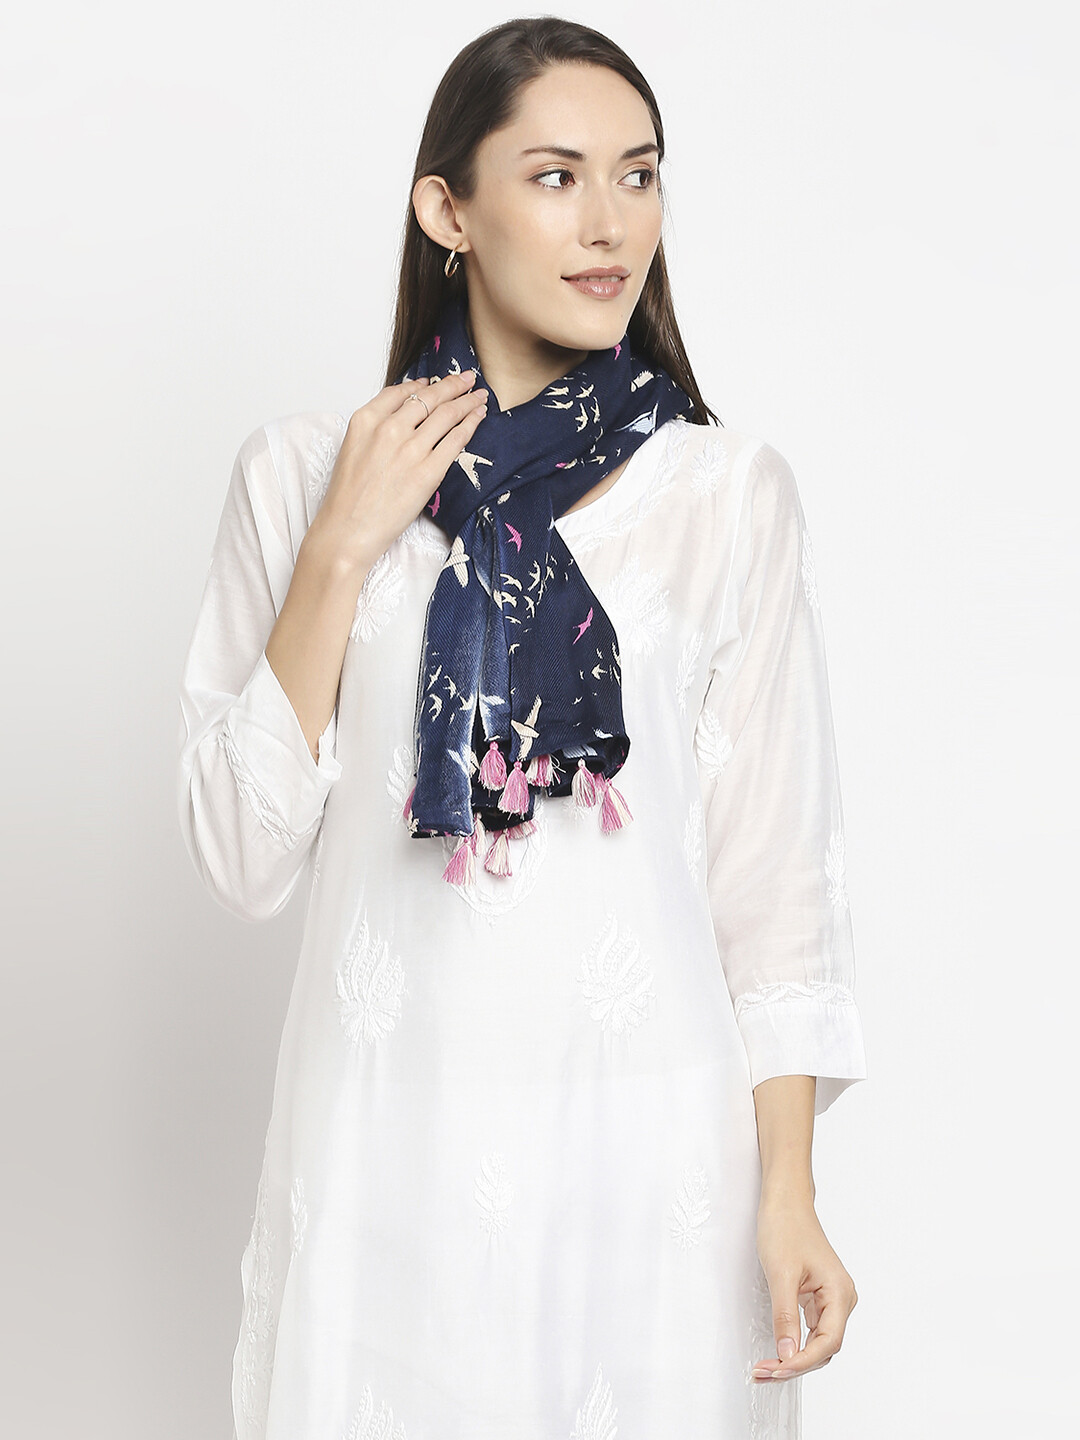 Birds Printed Navy Blue Scarf with tassels.